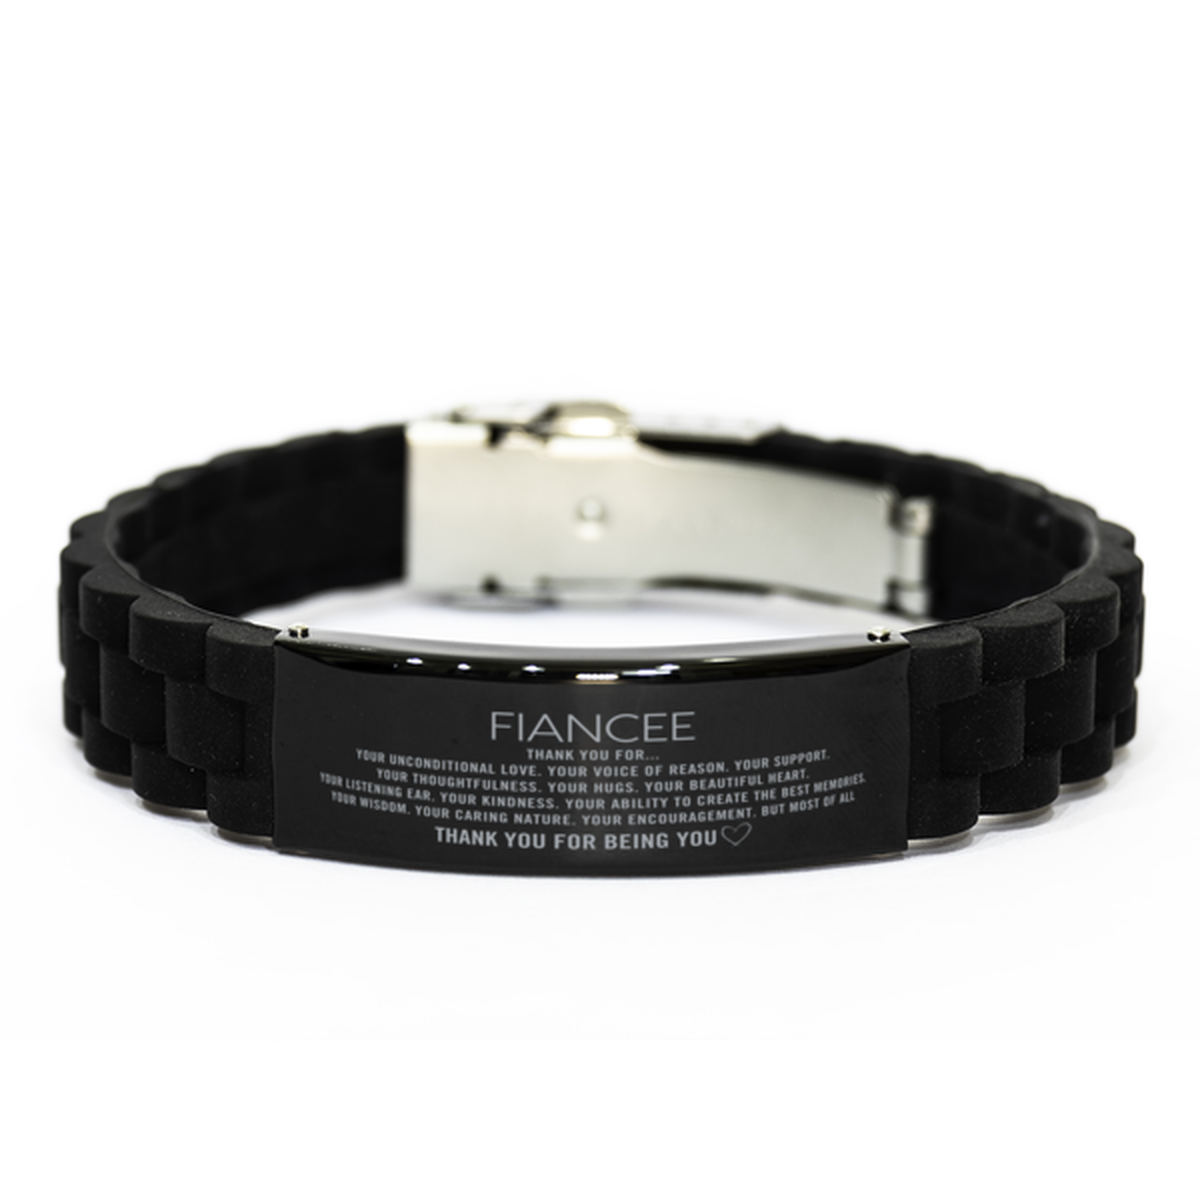 Fiancee Black Glidelock Clasp Bracelet Custom, Engraved Gifts For Fiancee Christmas Graduation Birthday Gifts for Men Women Fiancee Thank you for Your unconditional love